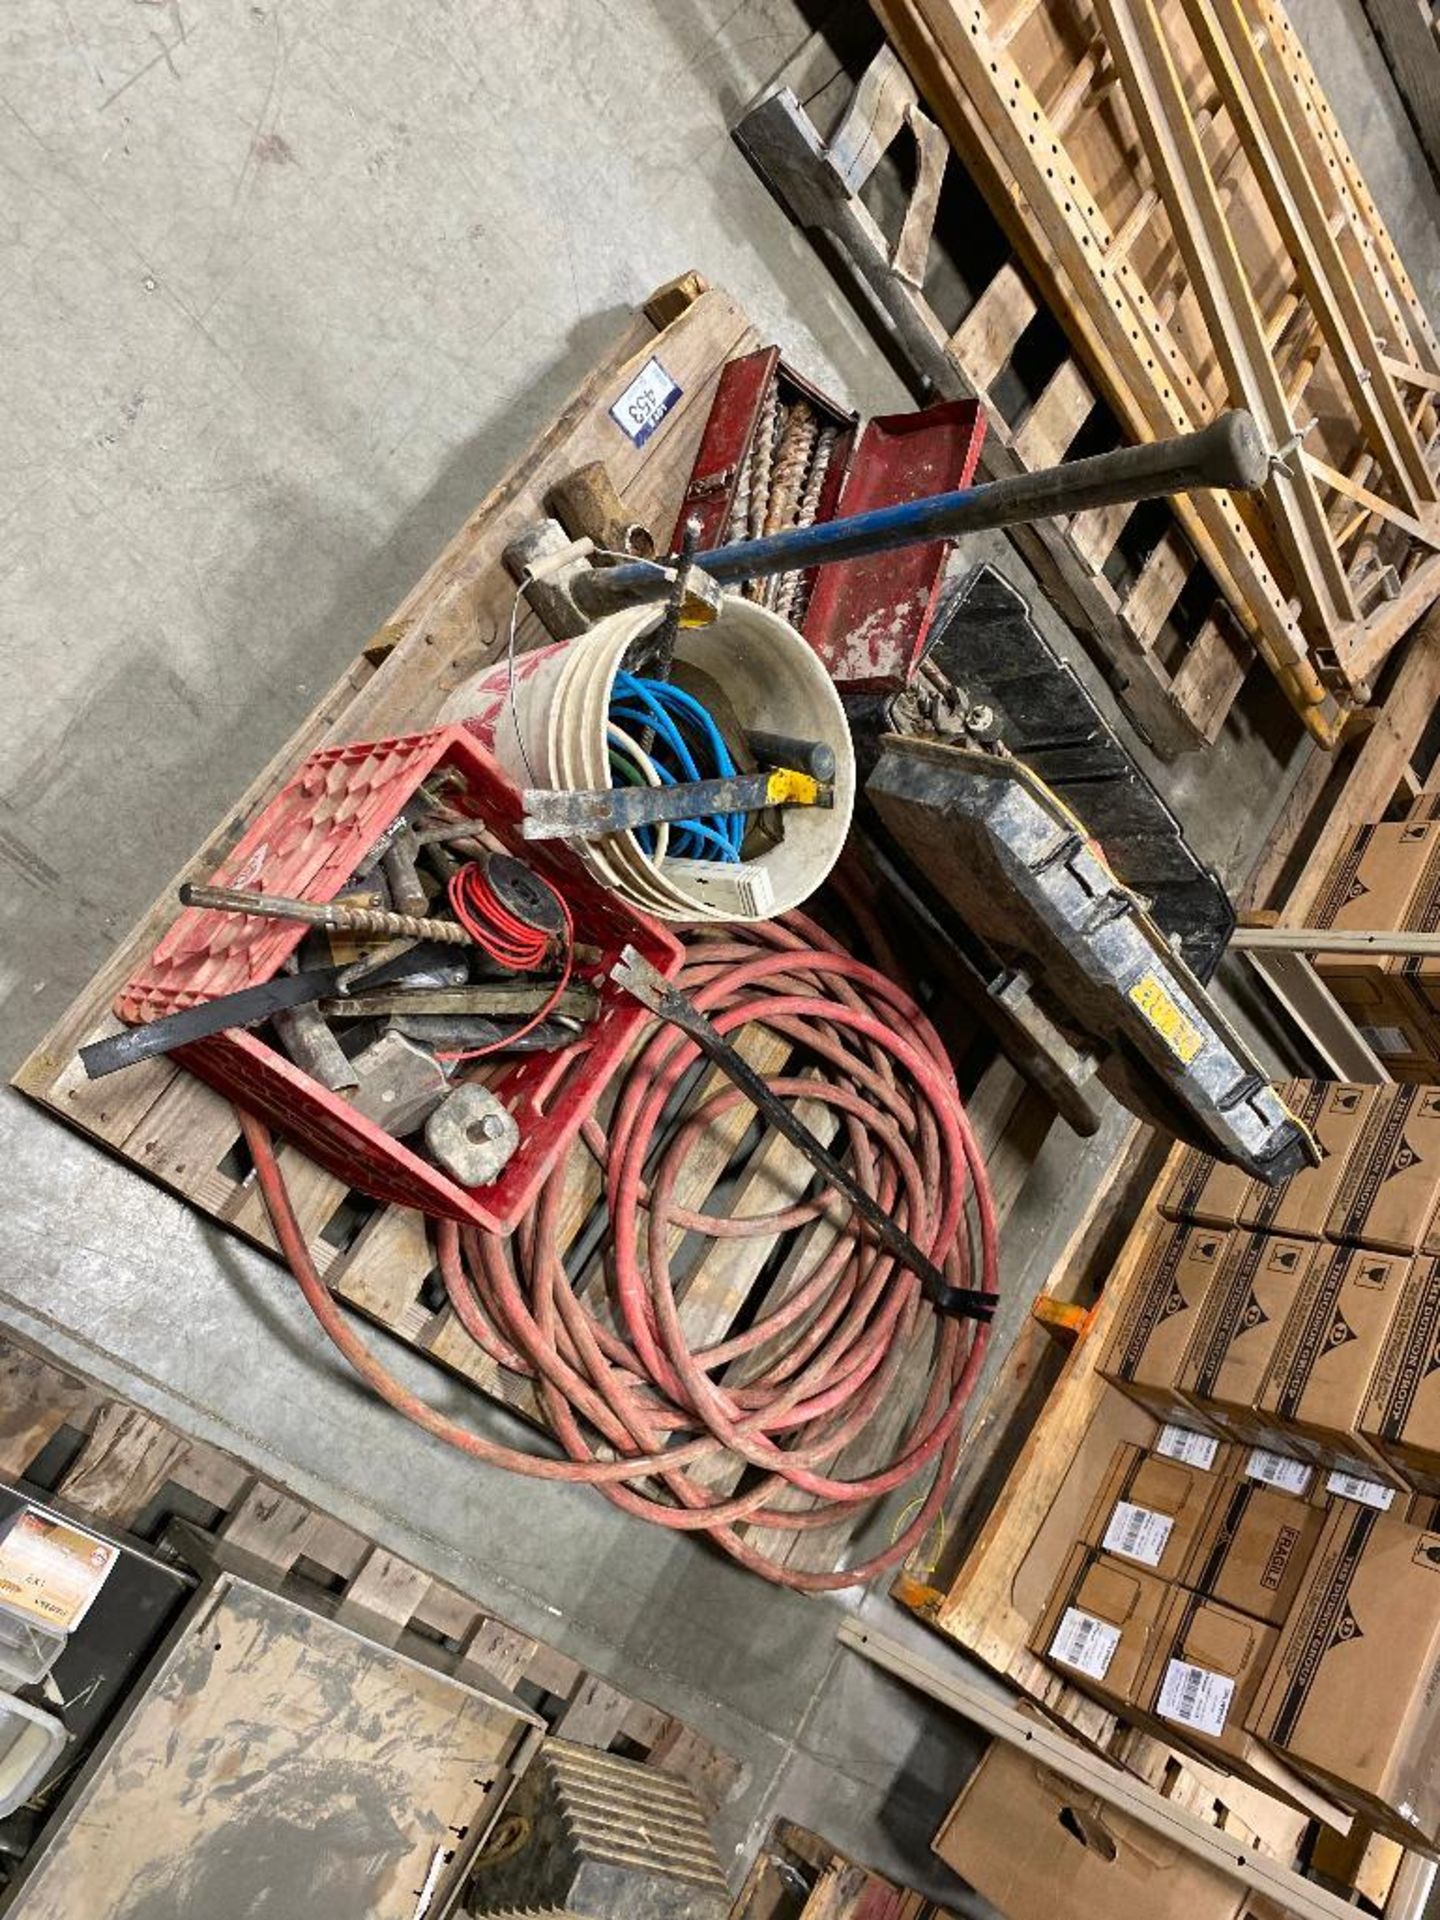 Pallet of Asst. Drill Bits, Wrenches, Pry Bar, Fall Arrest, Air Hose, etc. - Image 2 of 6